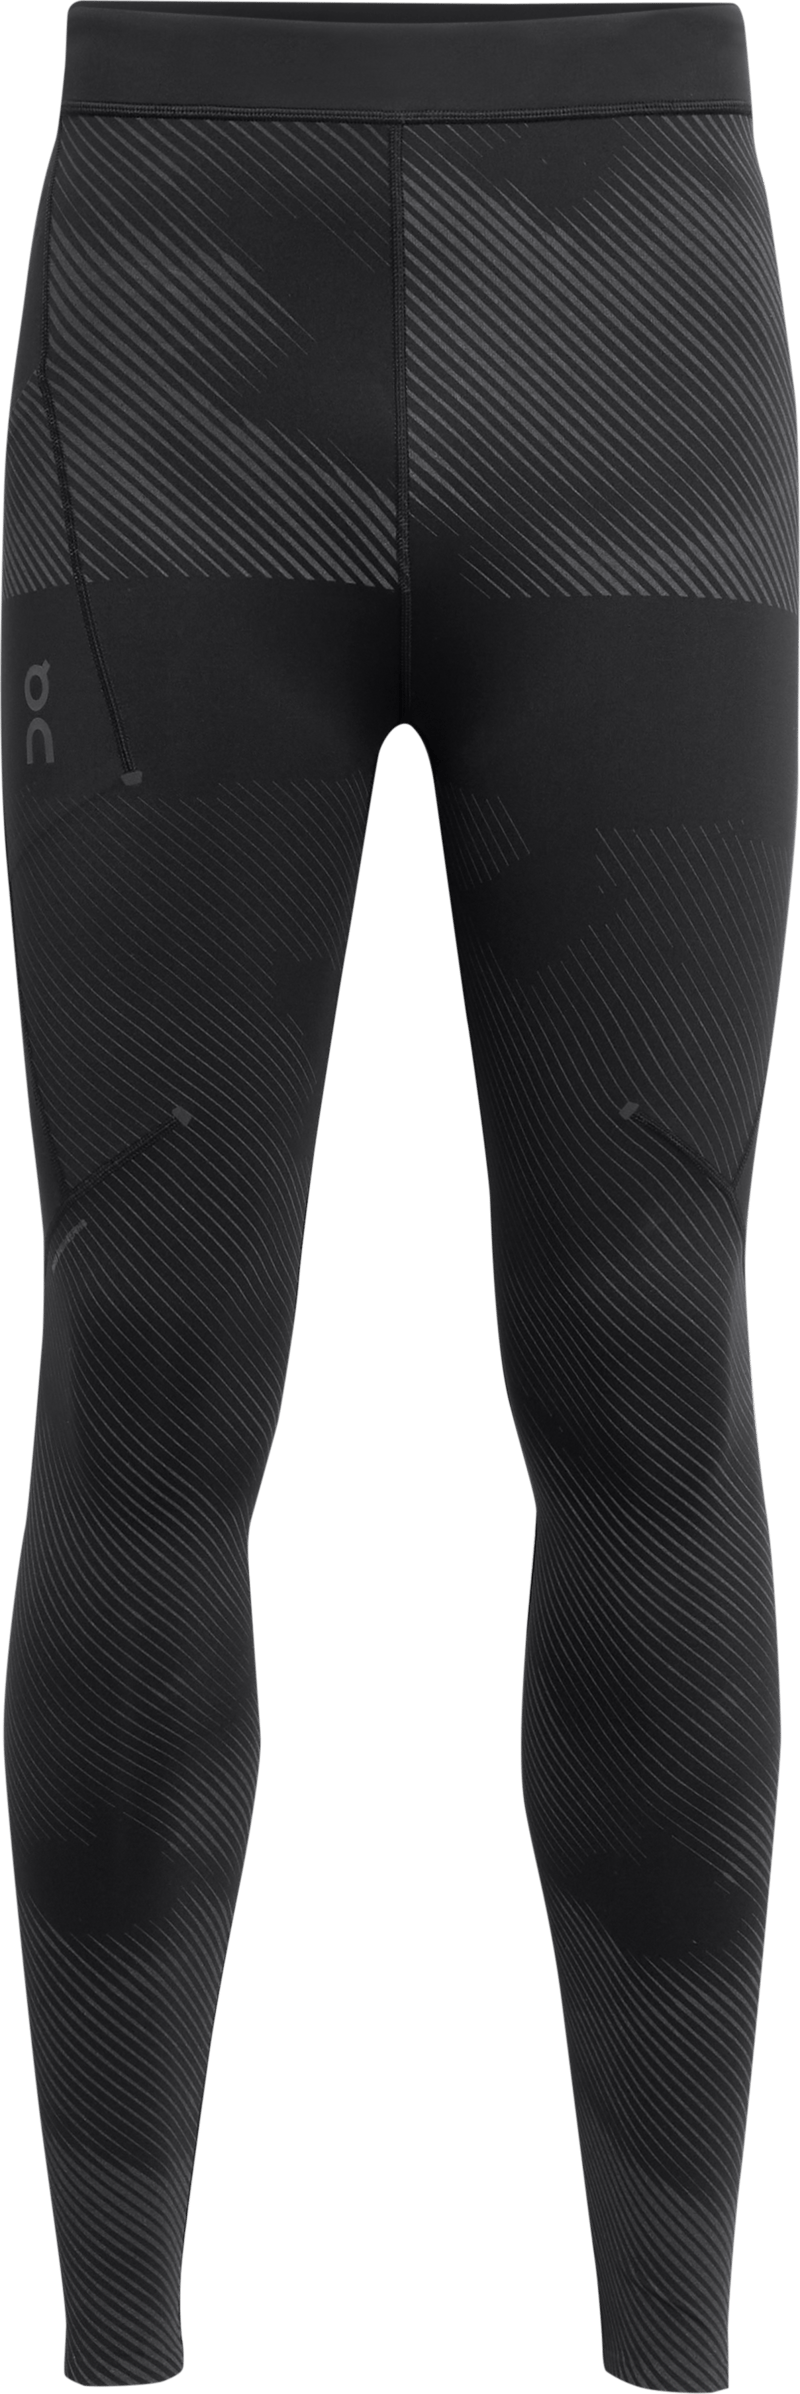 Buy Men's Performance Winter Tights Lumos Black here | Outnorth